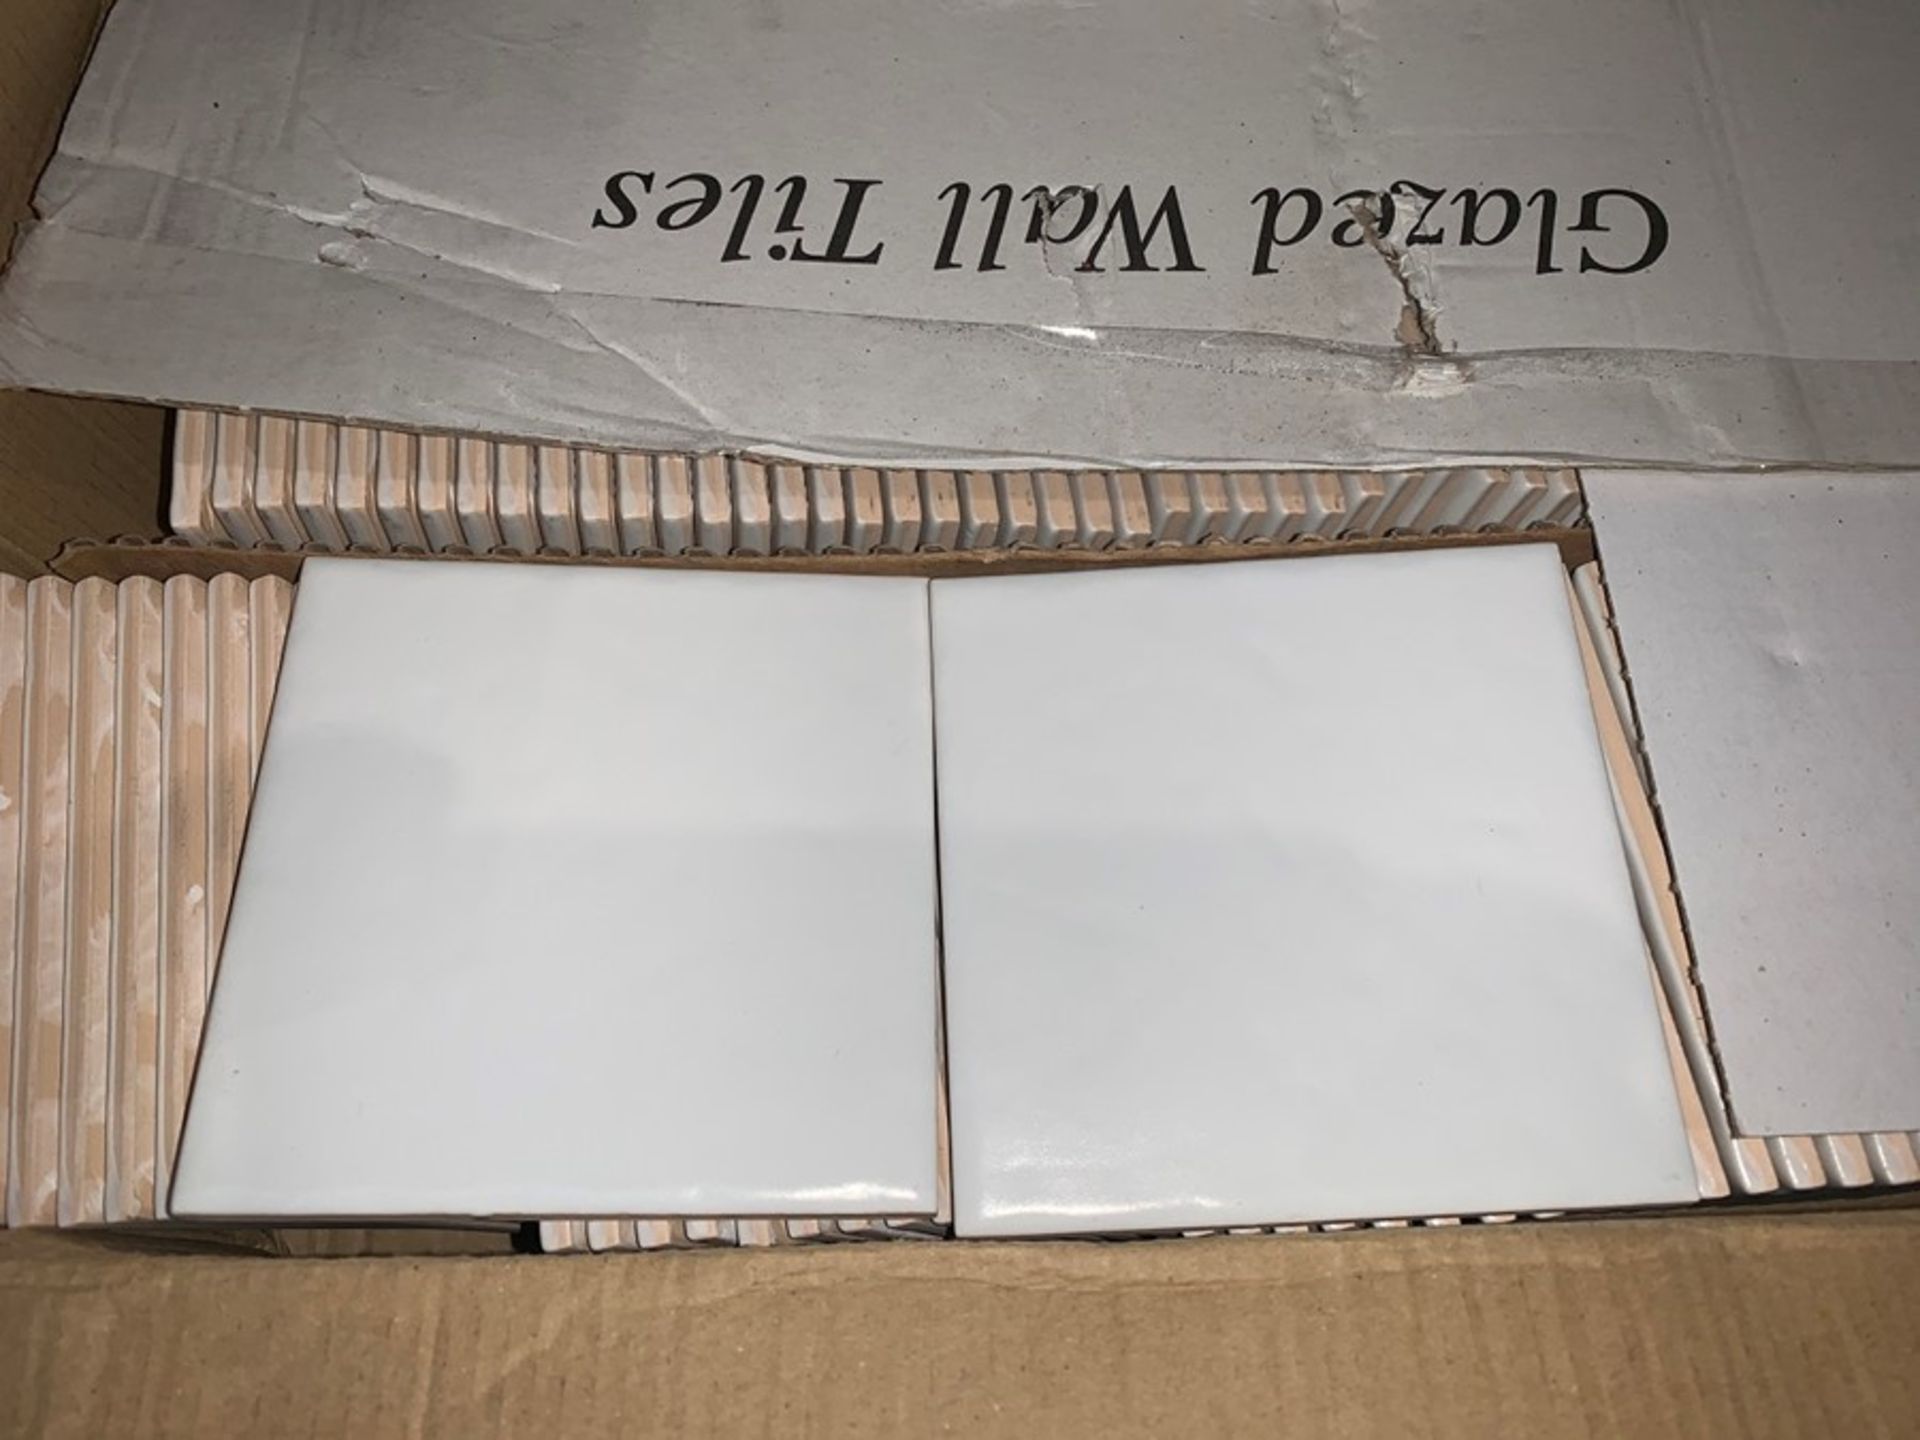 1 LOT TO CONTAIN 84 (APPROX) BOXES OF JOHNSON CERAMIC GLAZED COTSWOLD WALL TILES IN SHADED WHITE /